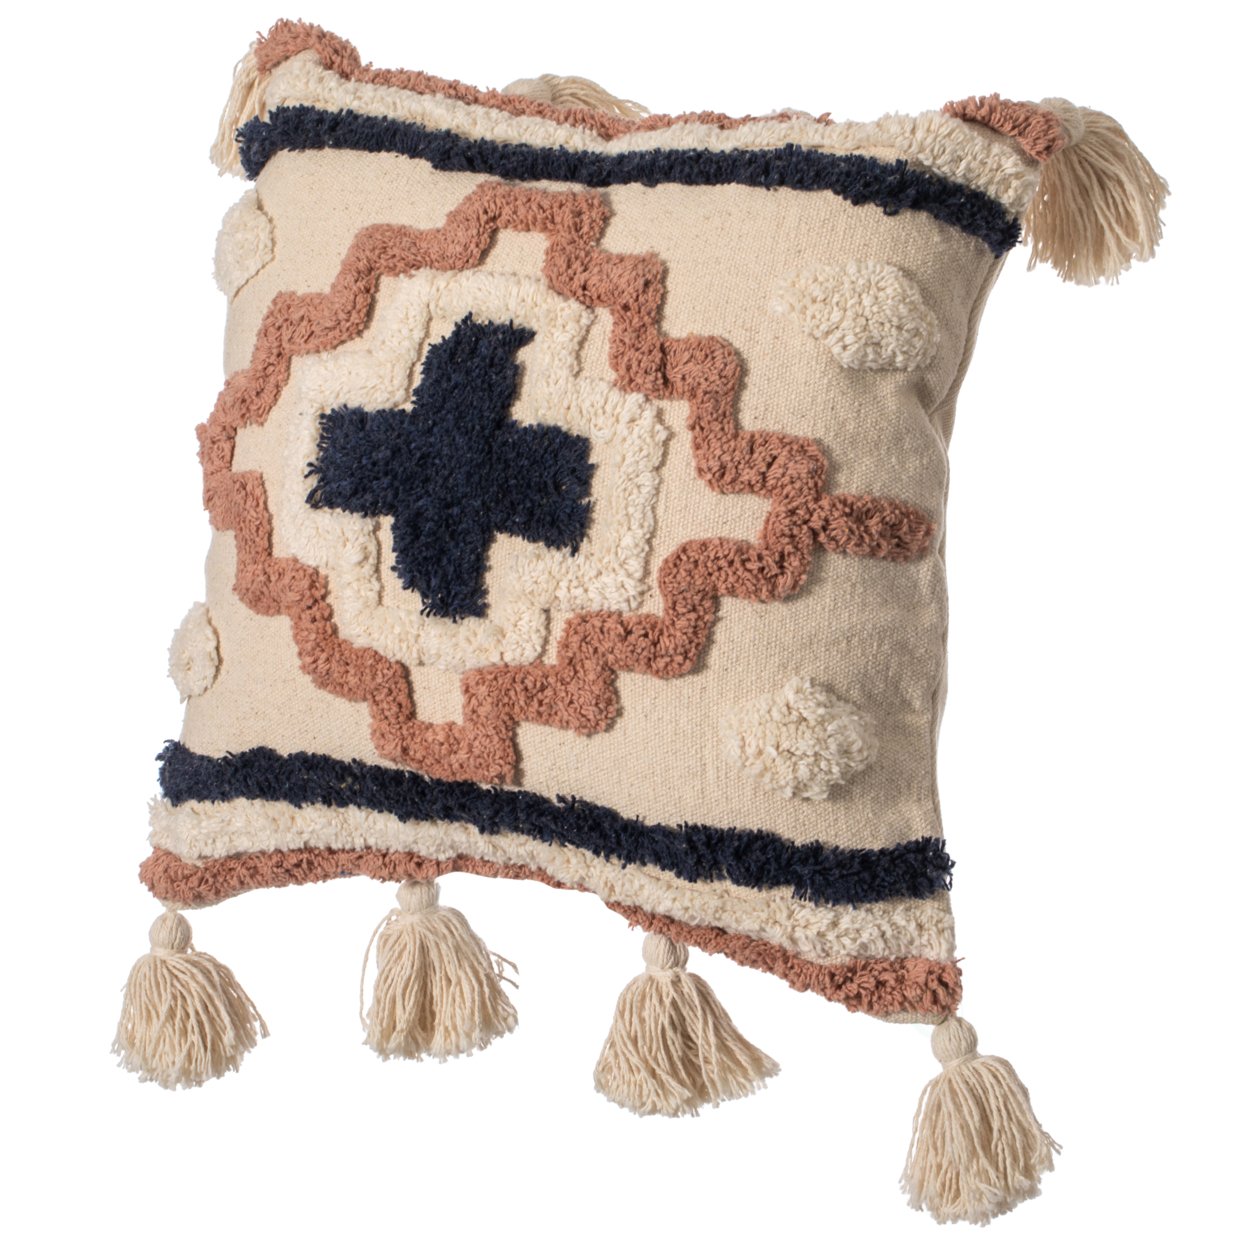 16 Handwoven Cotton Throw Pillow Cover With Tufted Designs And Side Tassels - Tribal With Cushion